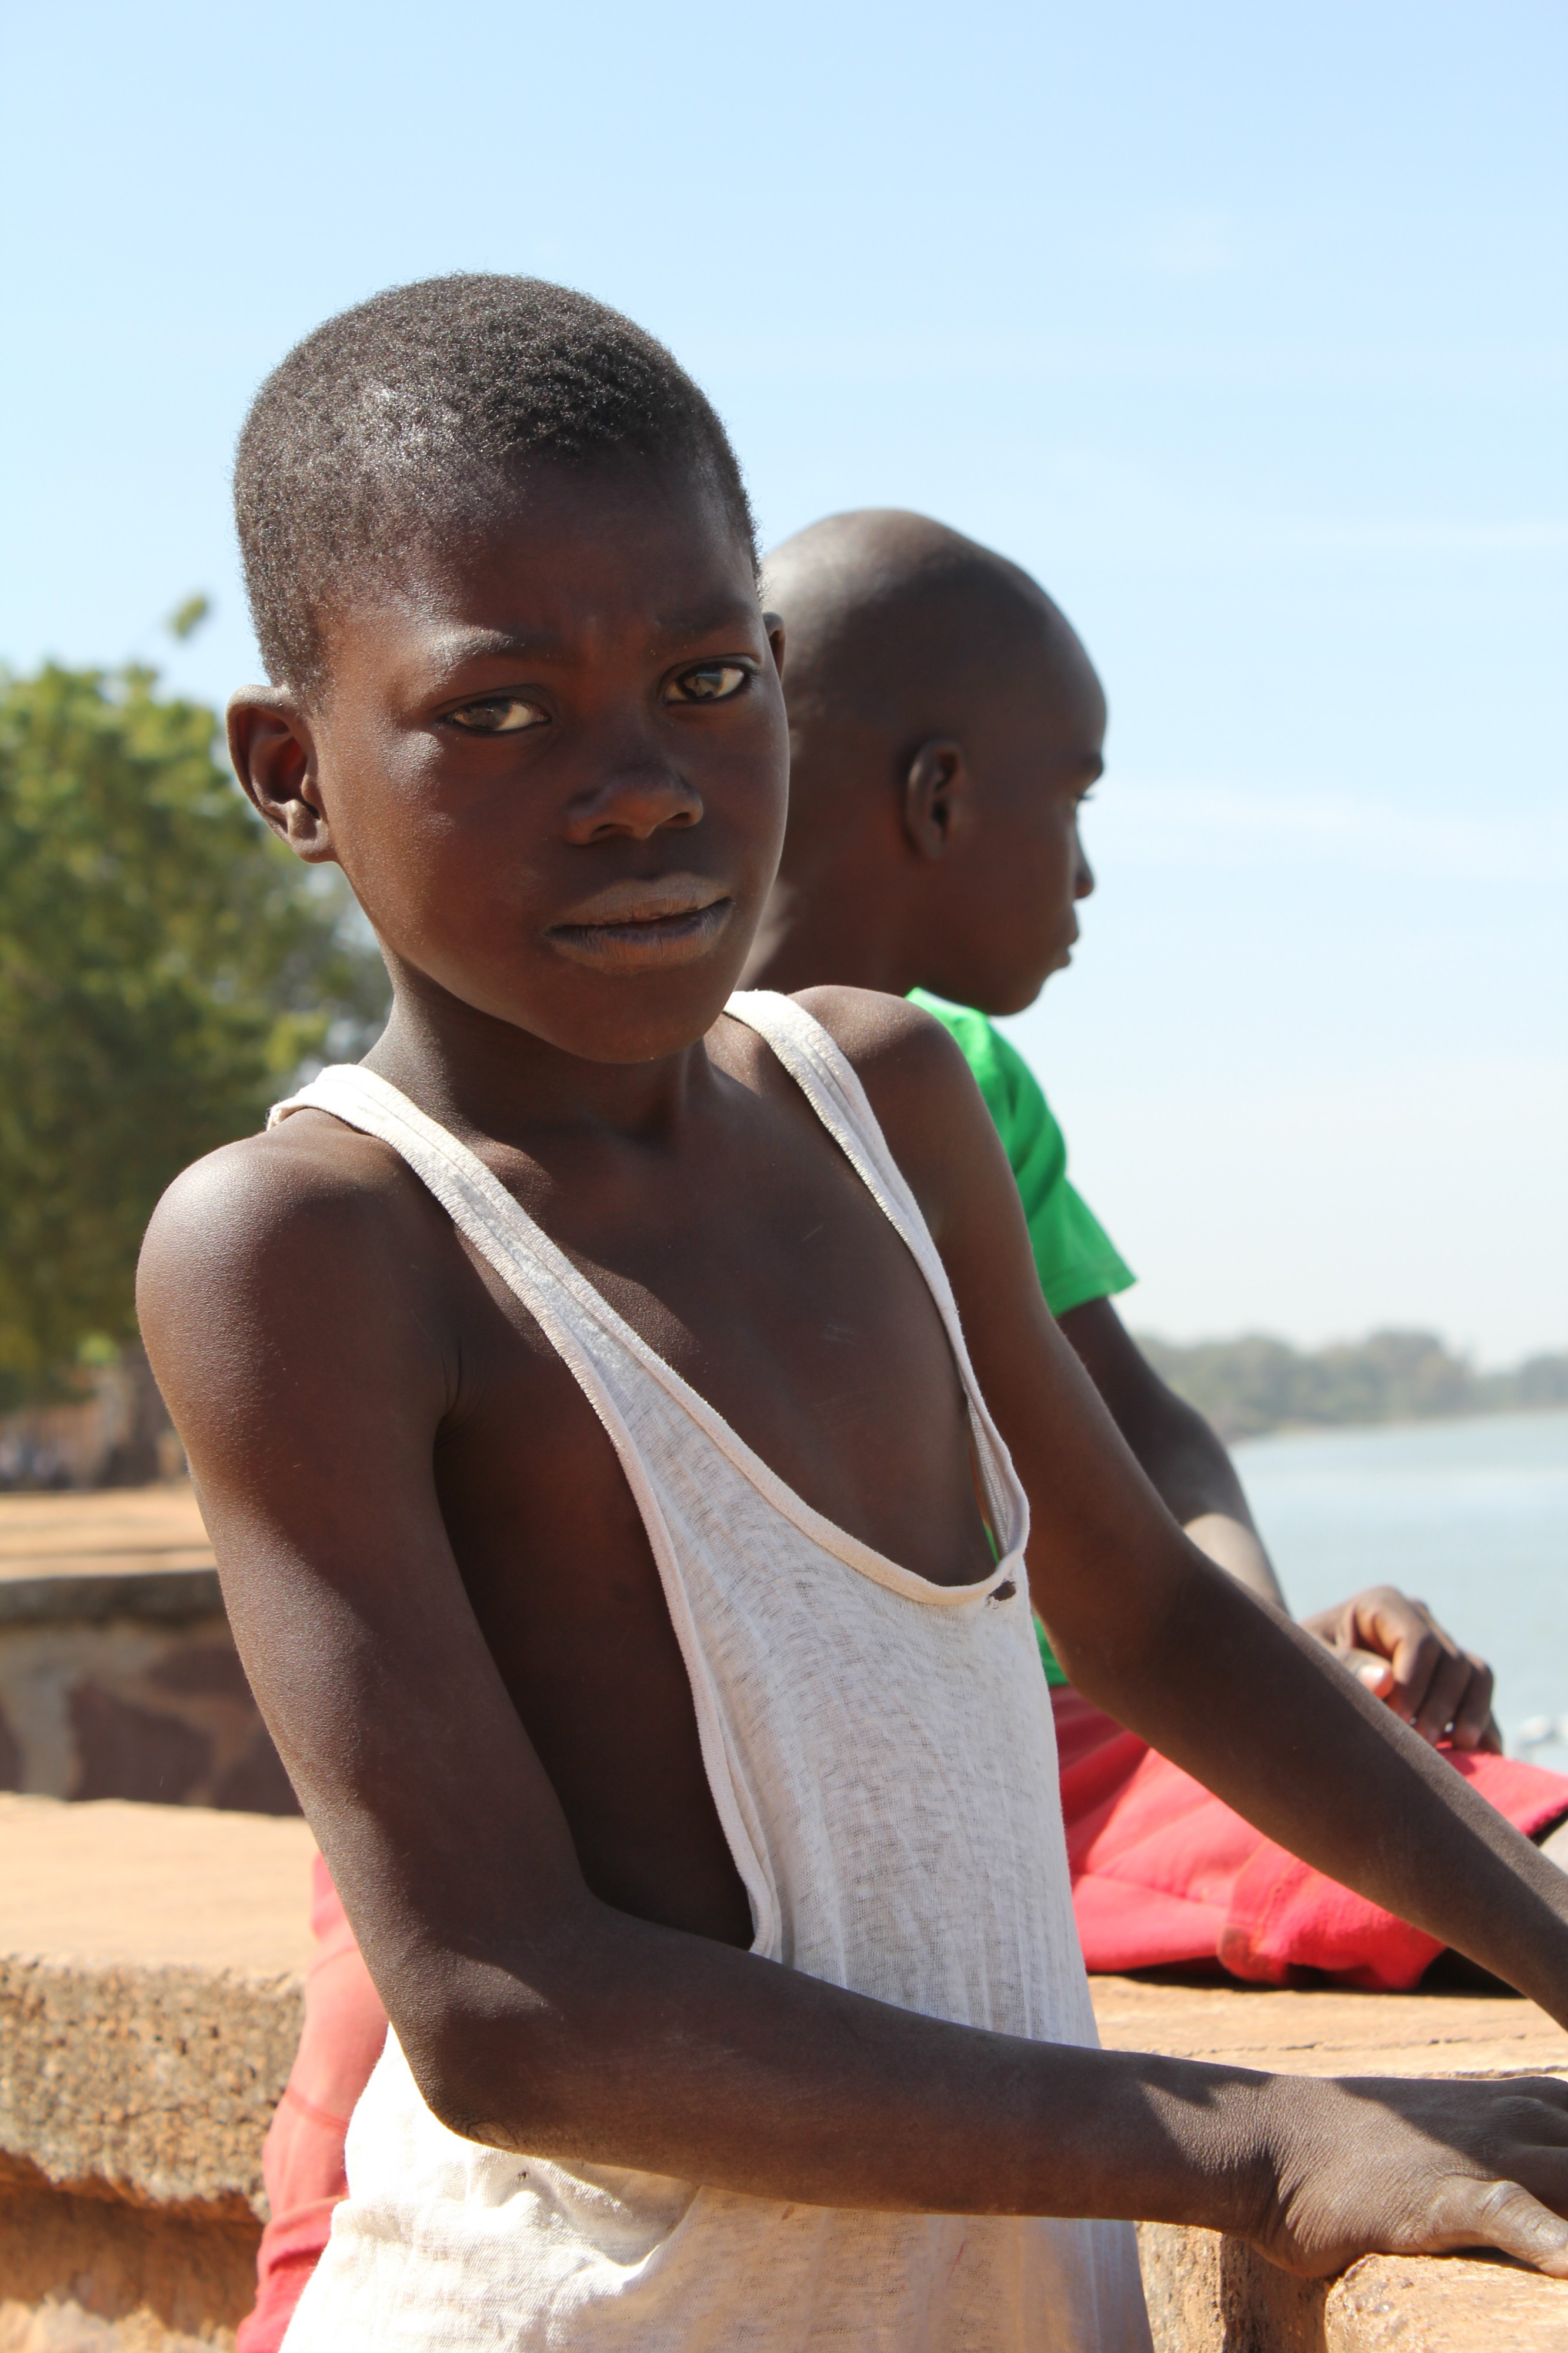 Children relaxing by the Niger river in Ségou, Mali, December 2010 (8406145136)